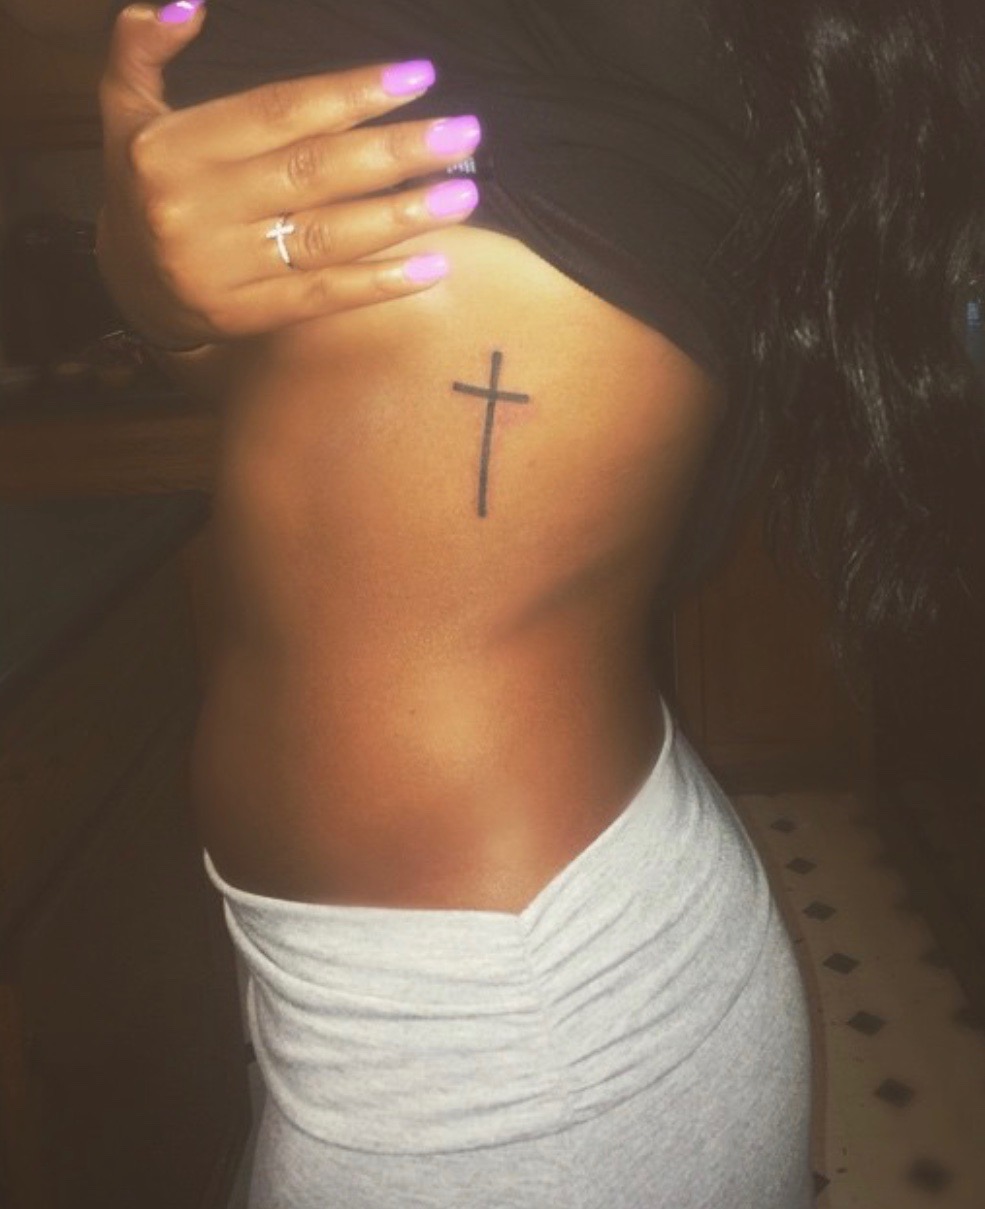 243 Small Tattoo For Ladies That Create Big Impact